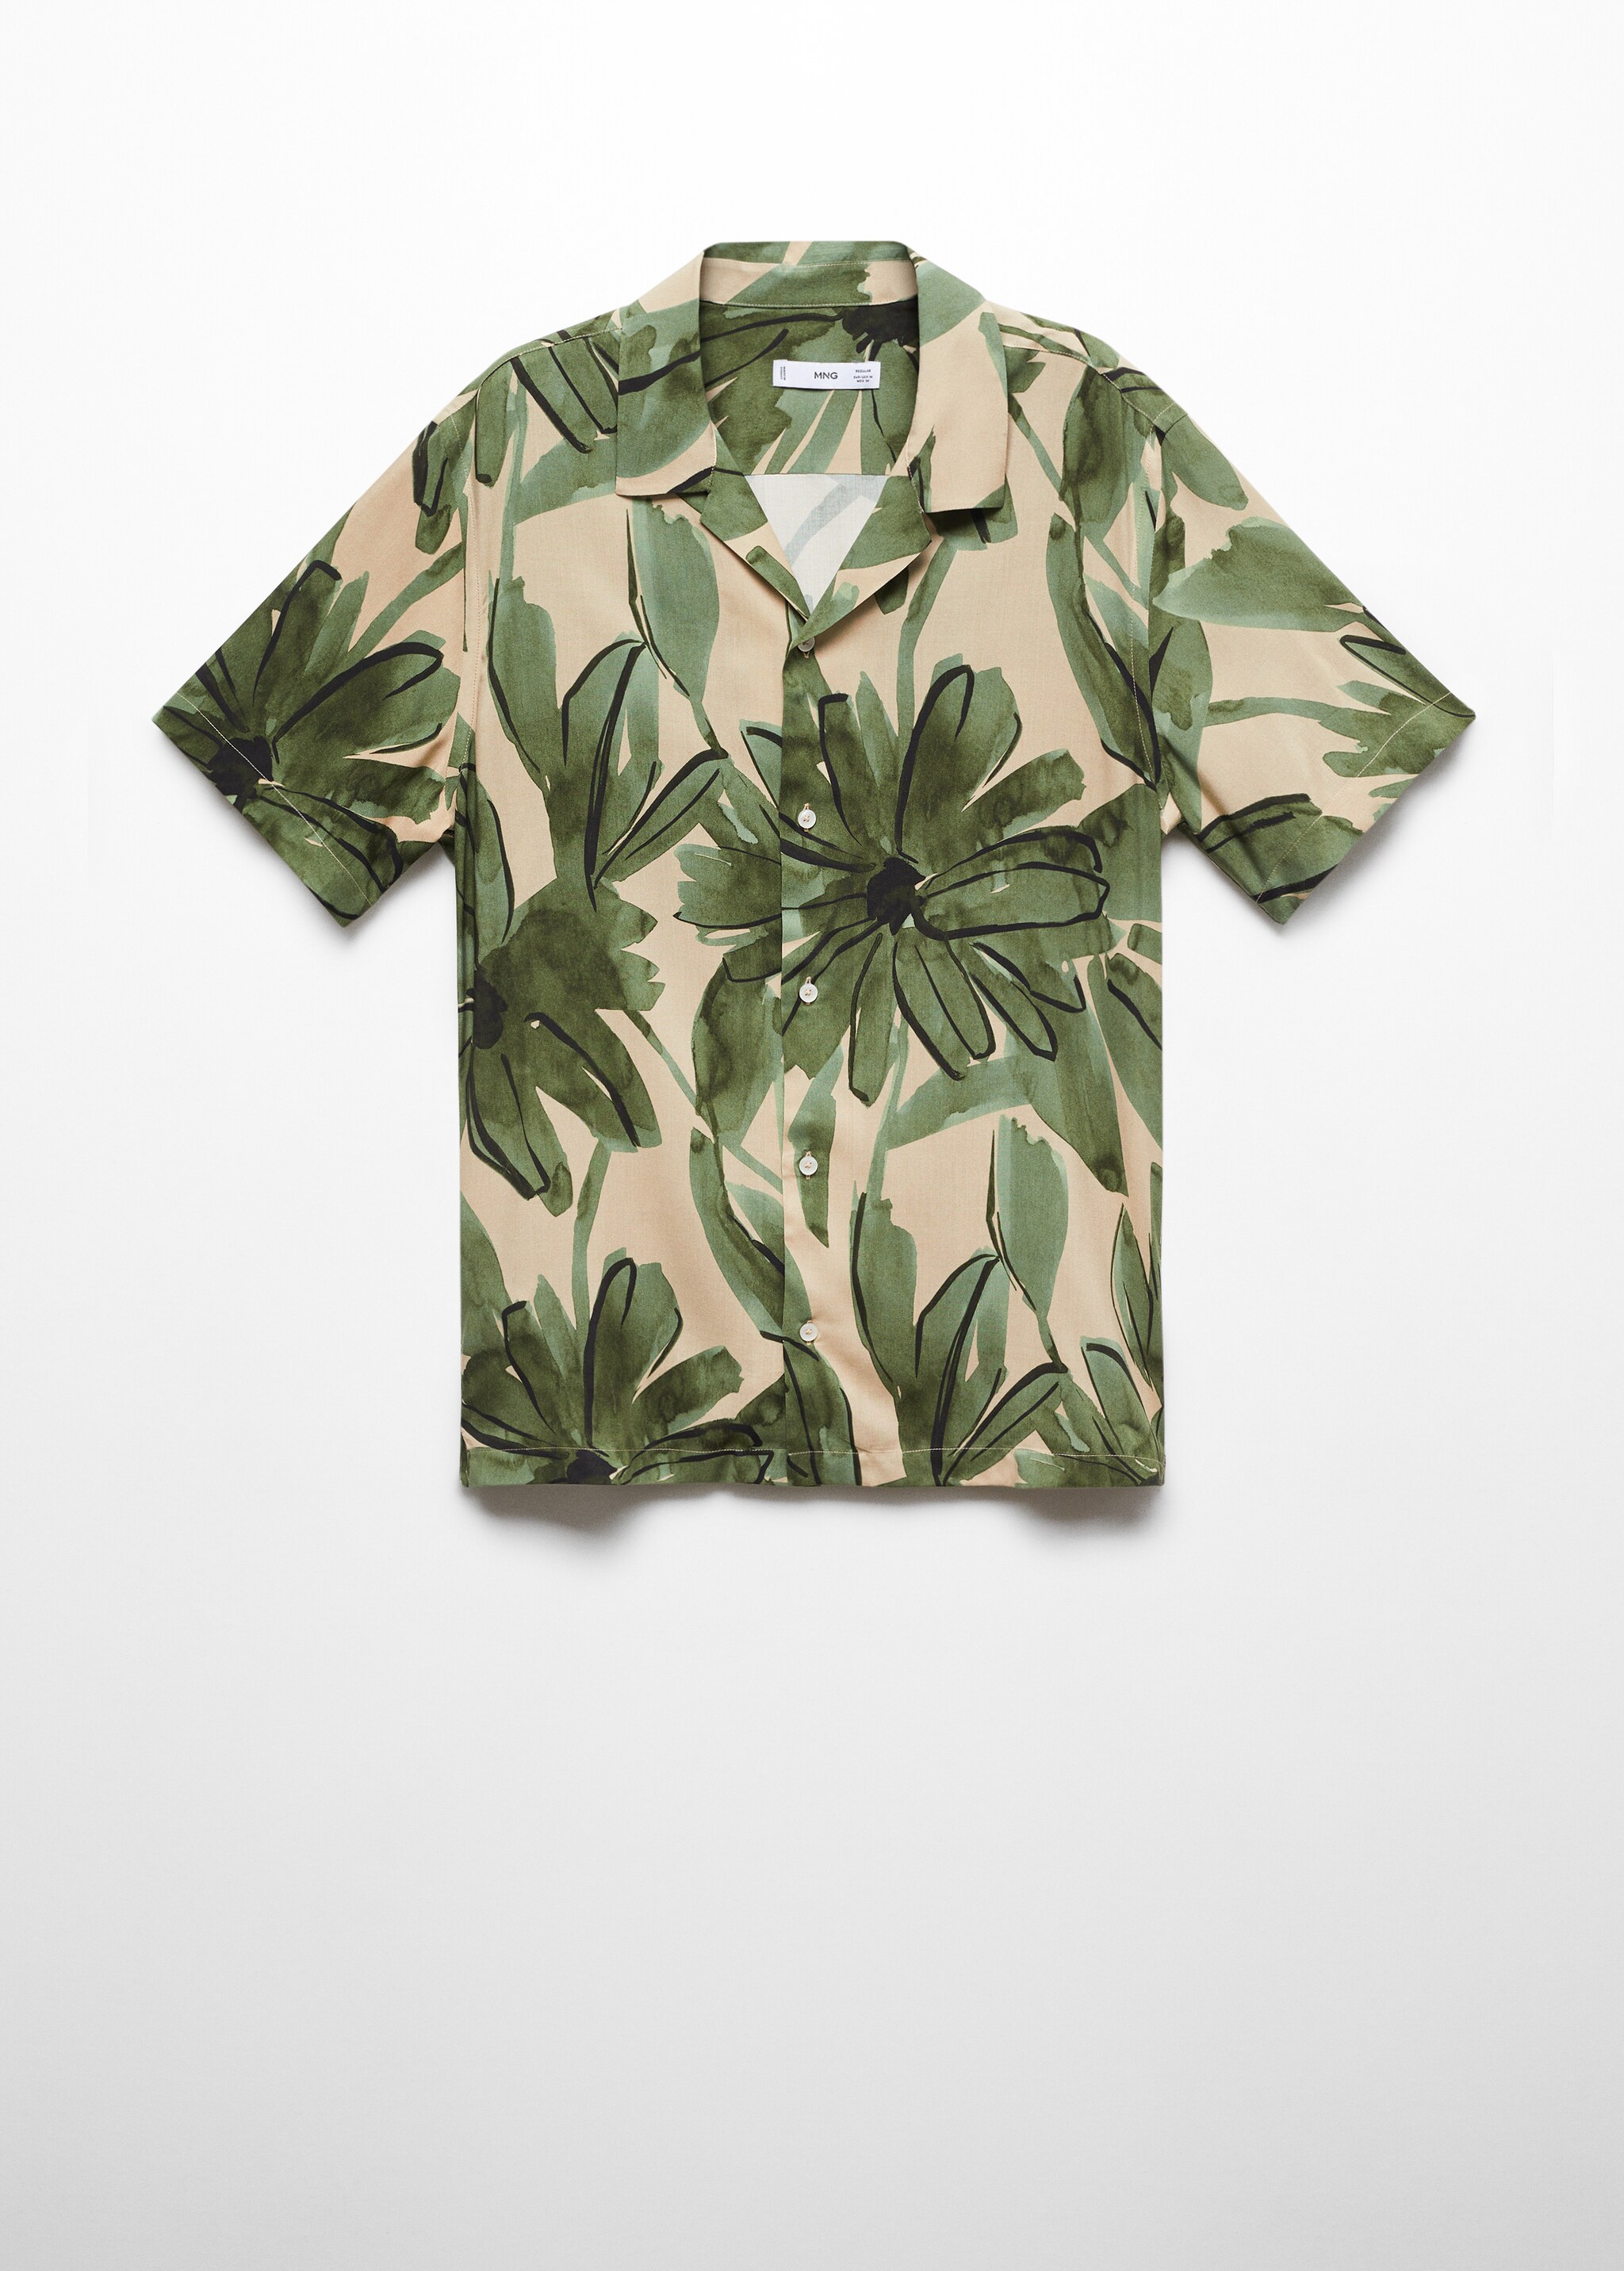 Flowing tropical print shirt - Article without model